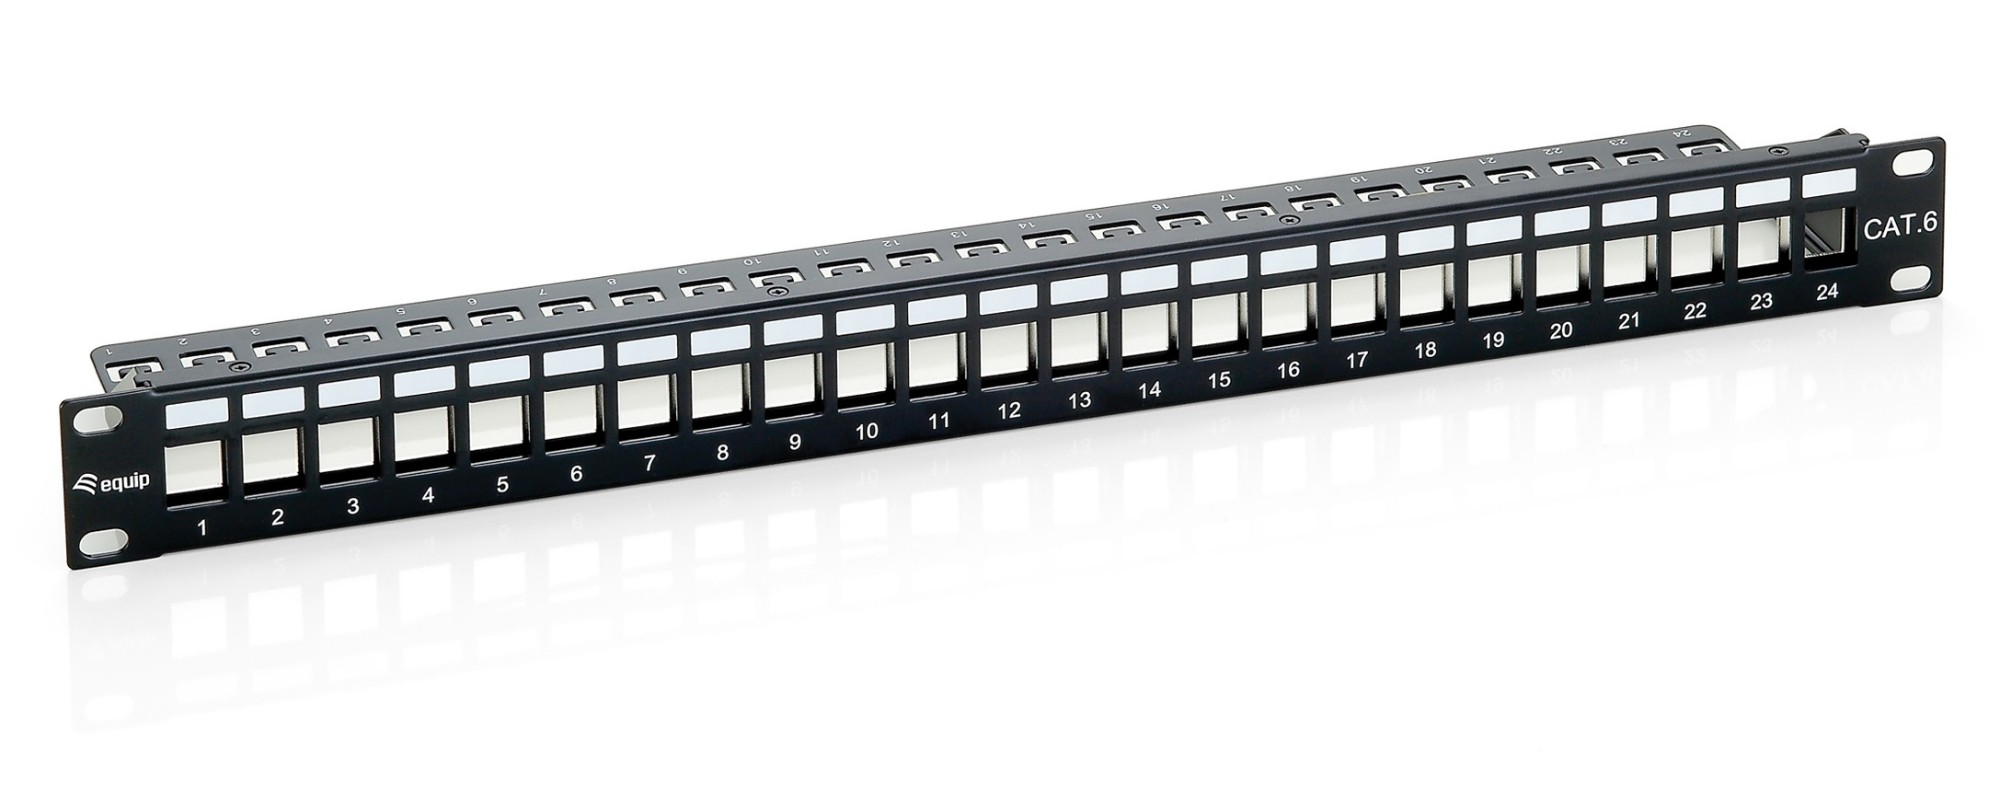 Photos - Other network equipment Equip 24-Port Keystone Cat.6 Shielded Patch Panel, Black 769124 